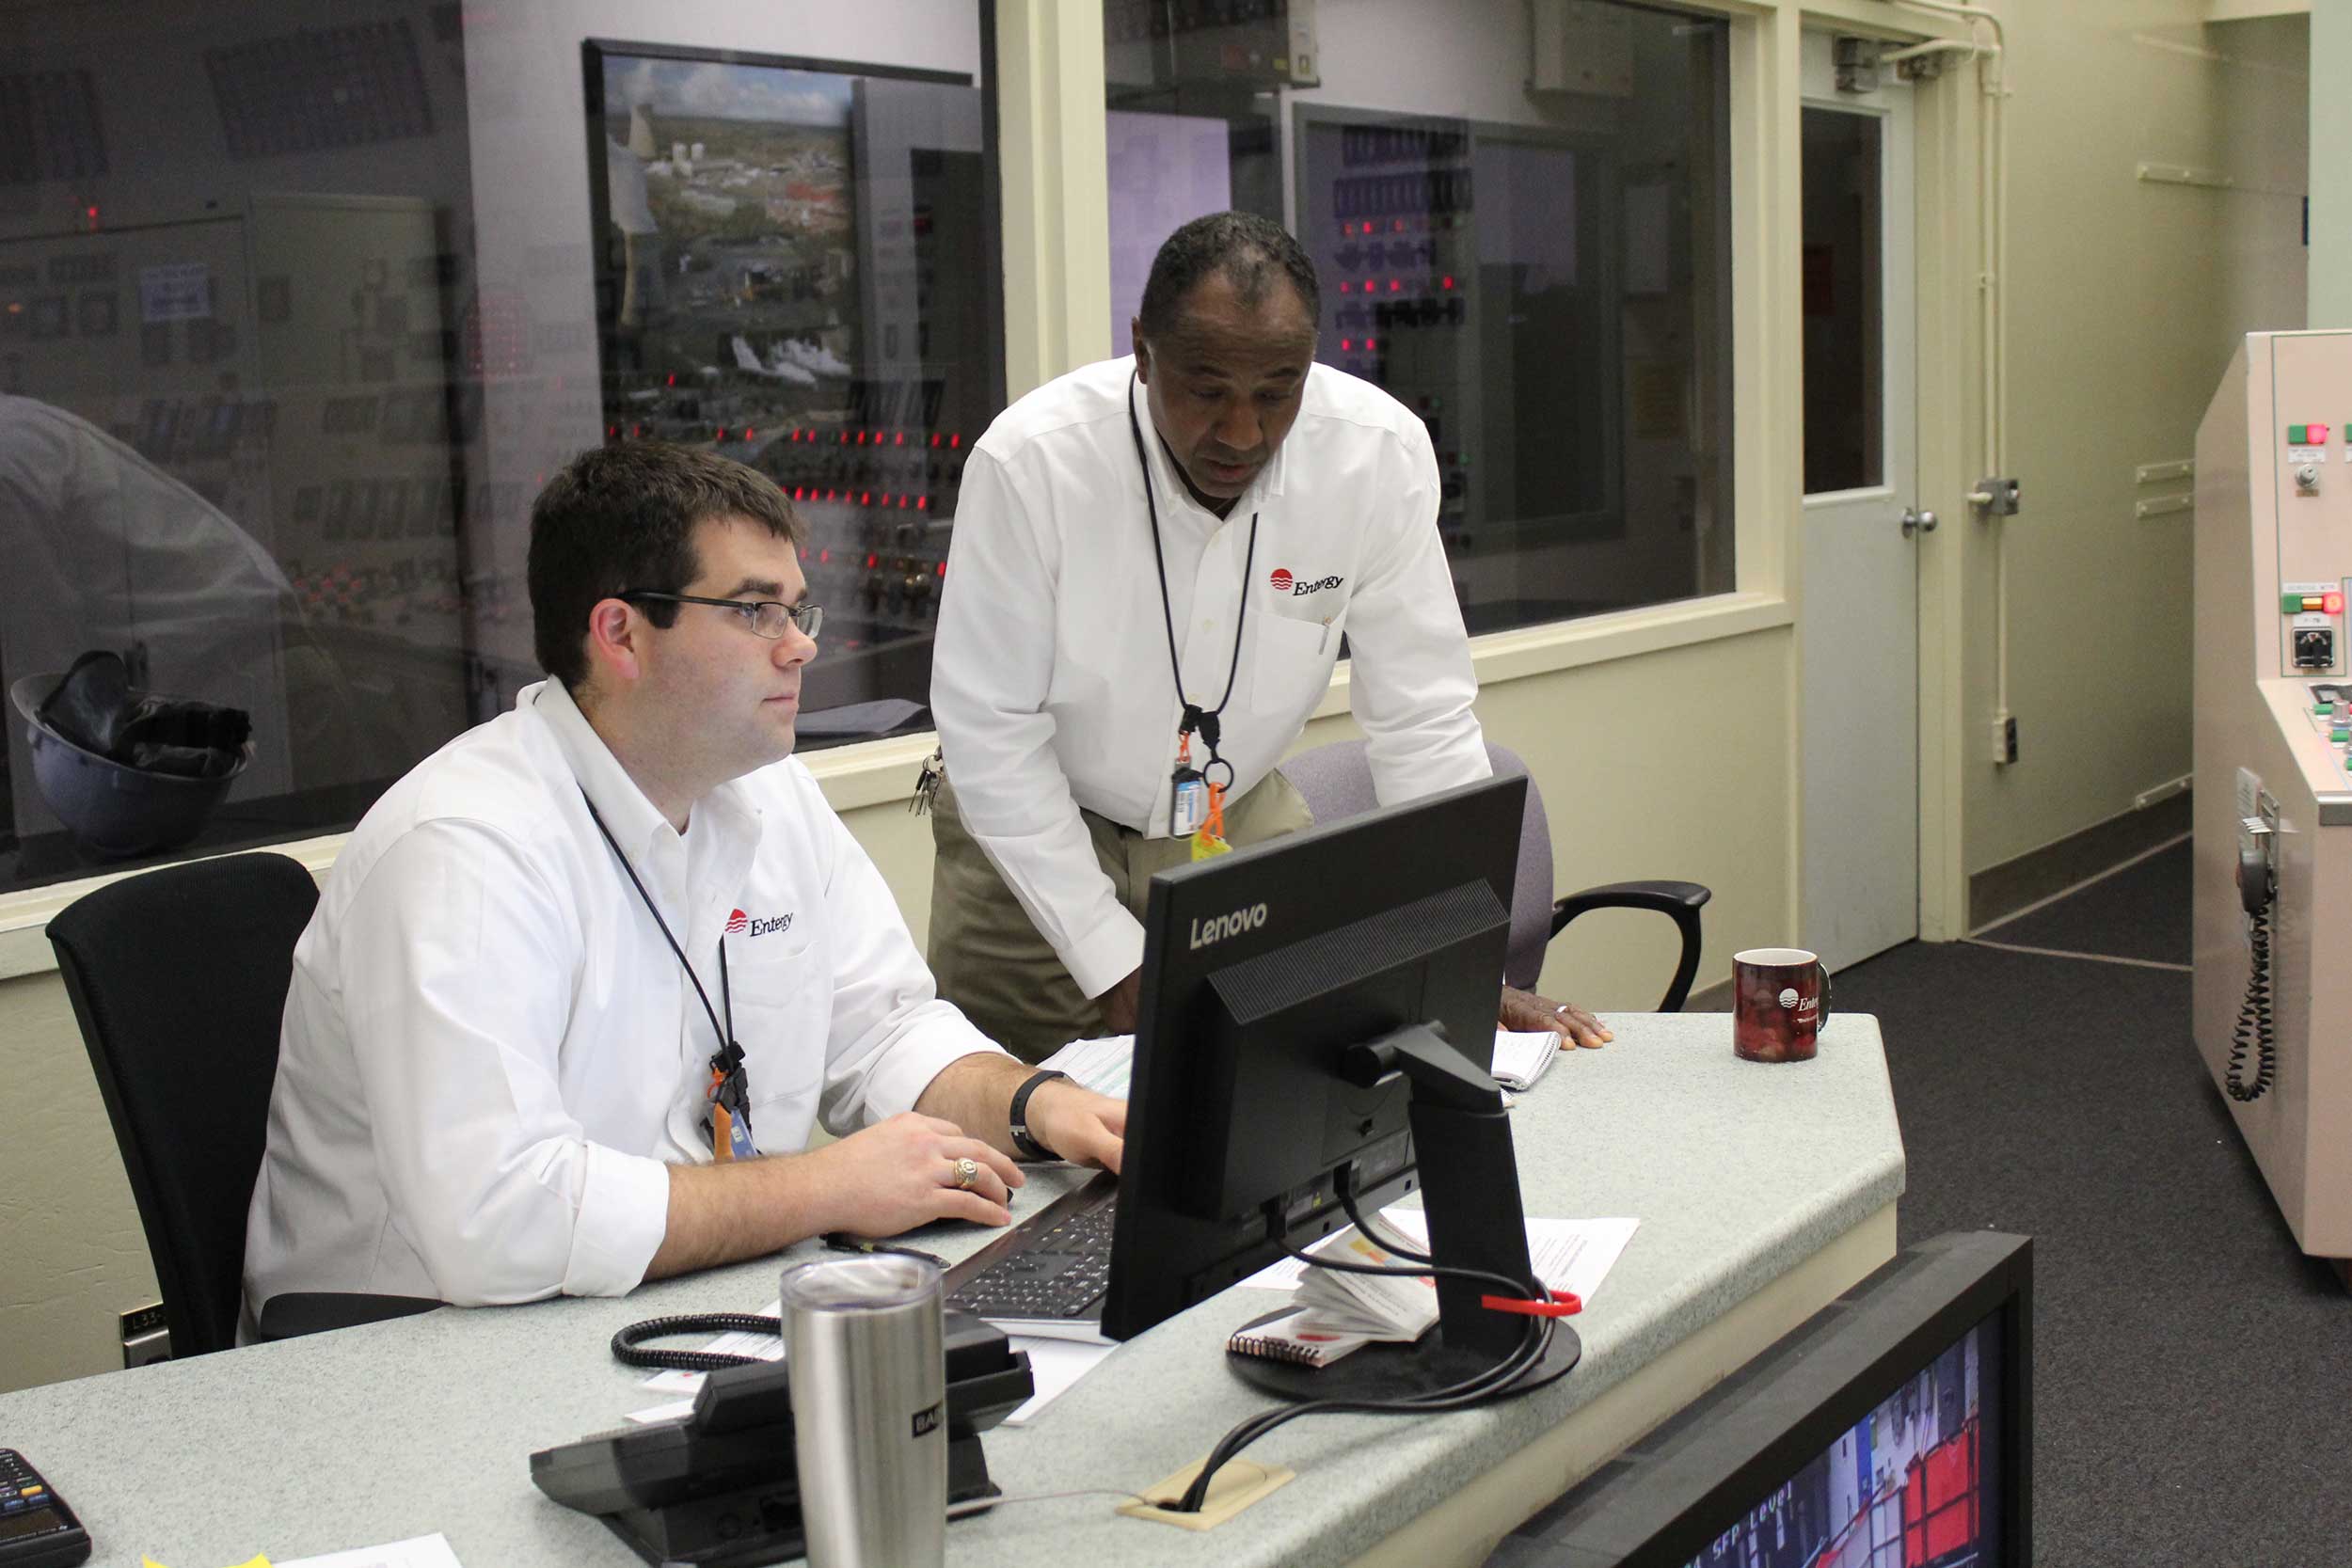 Two Entergy employees collaborate together on work